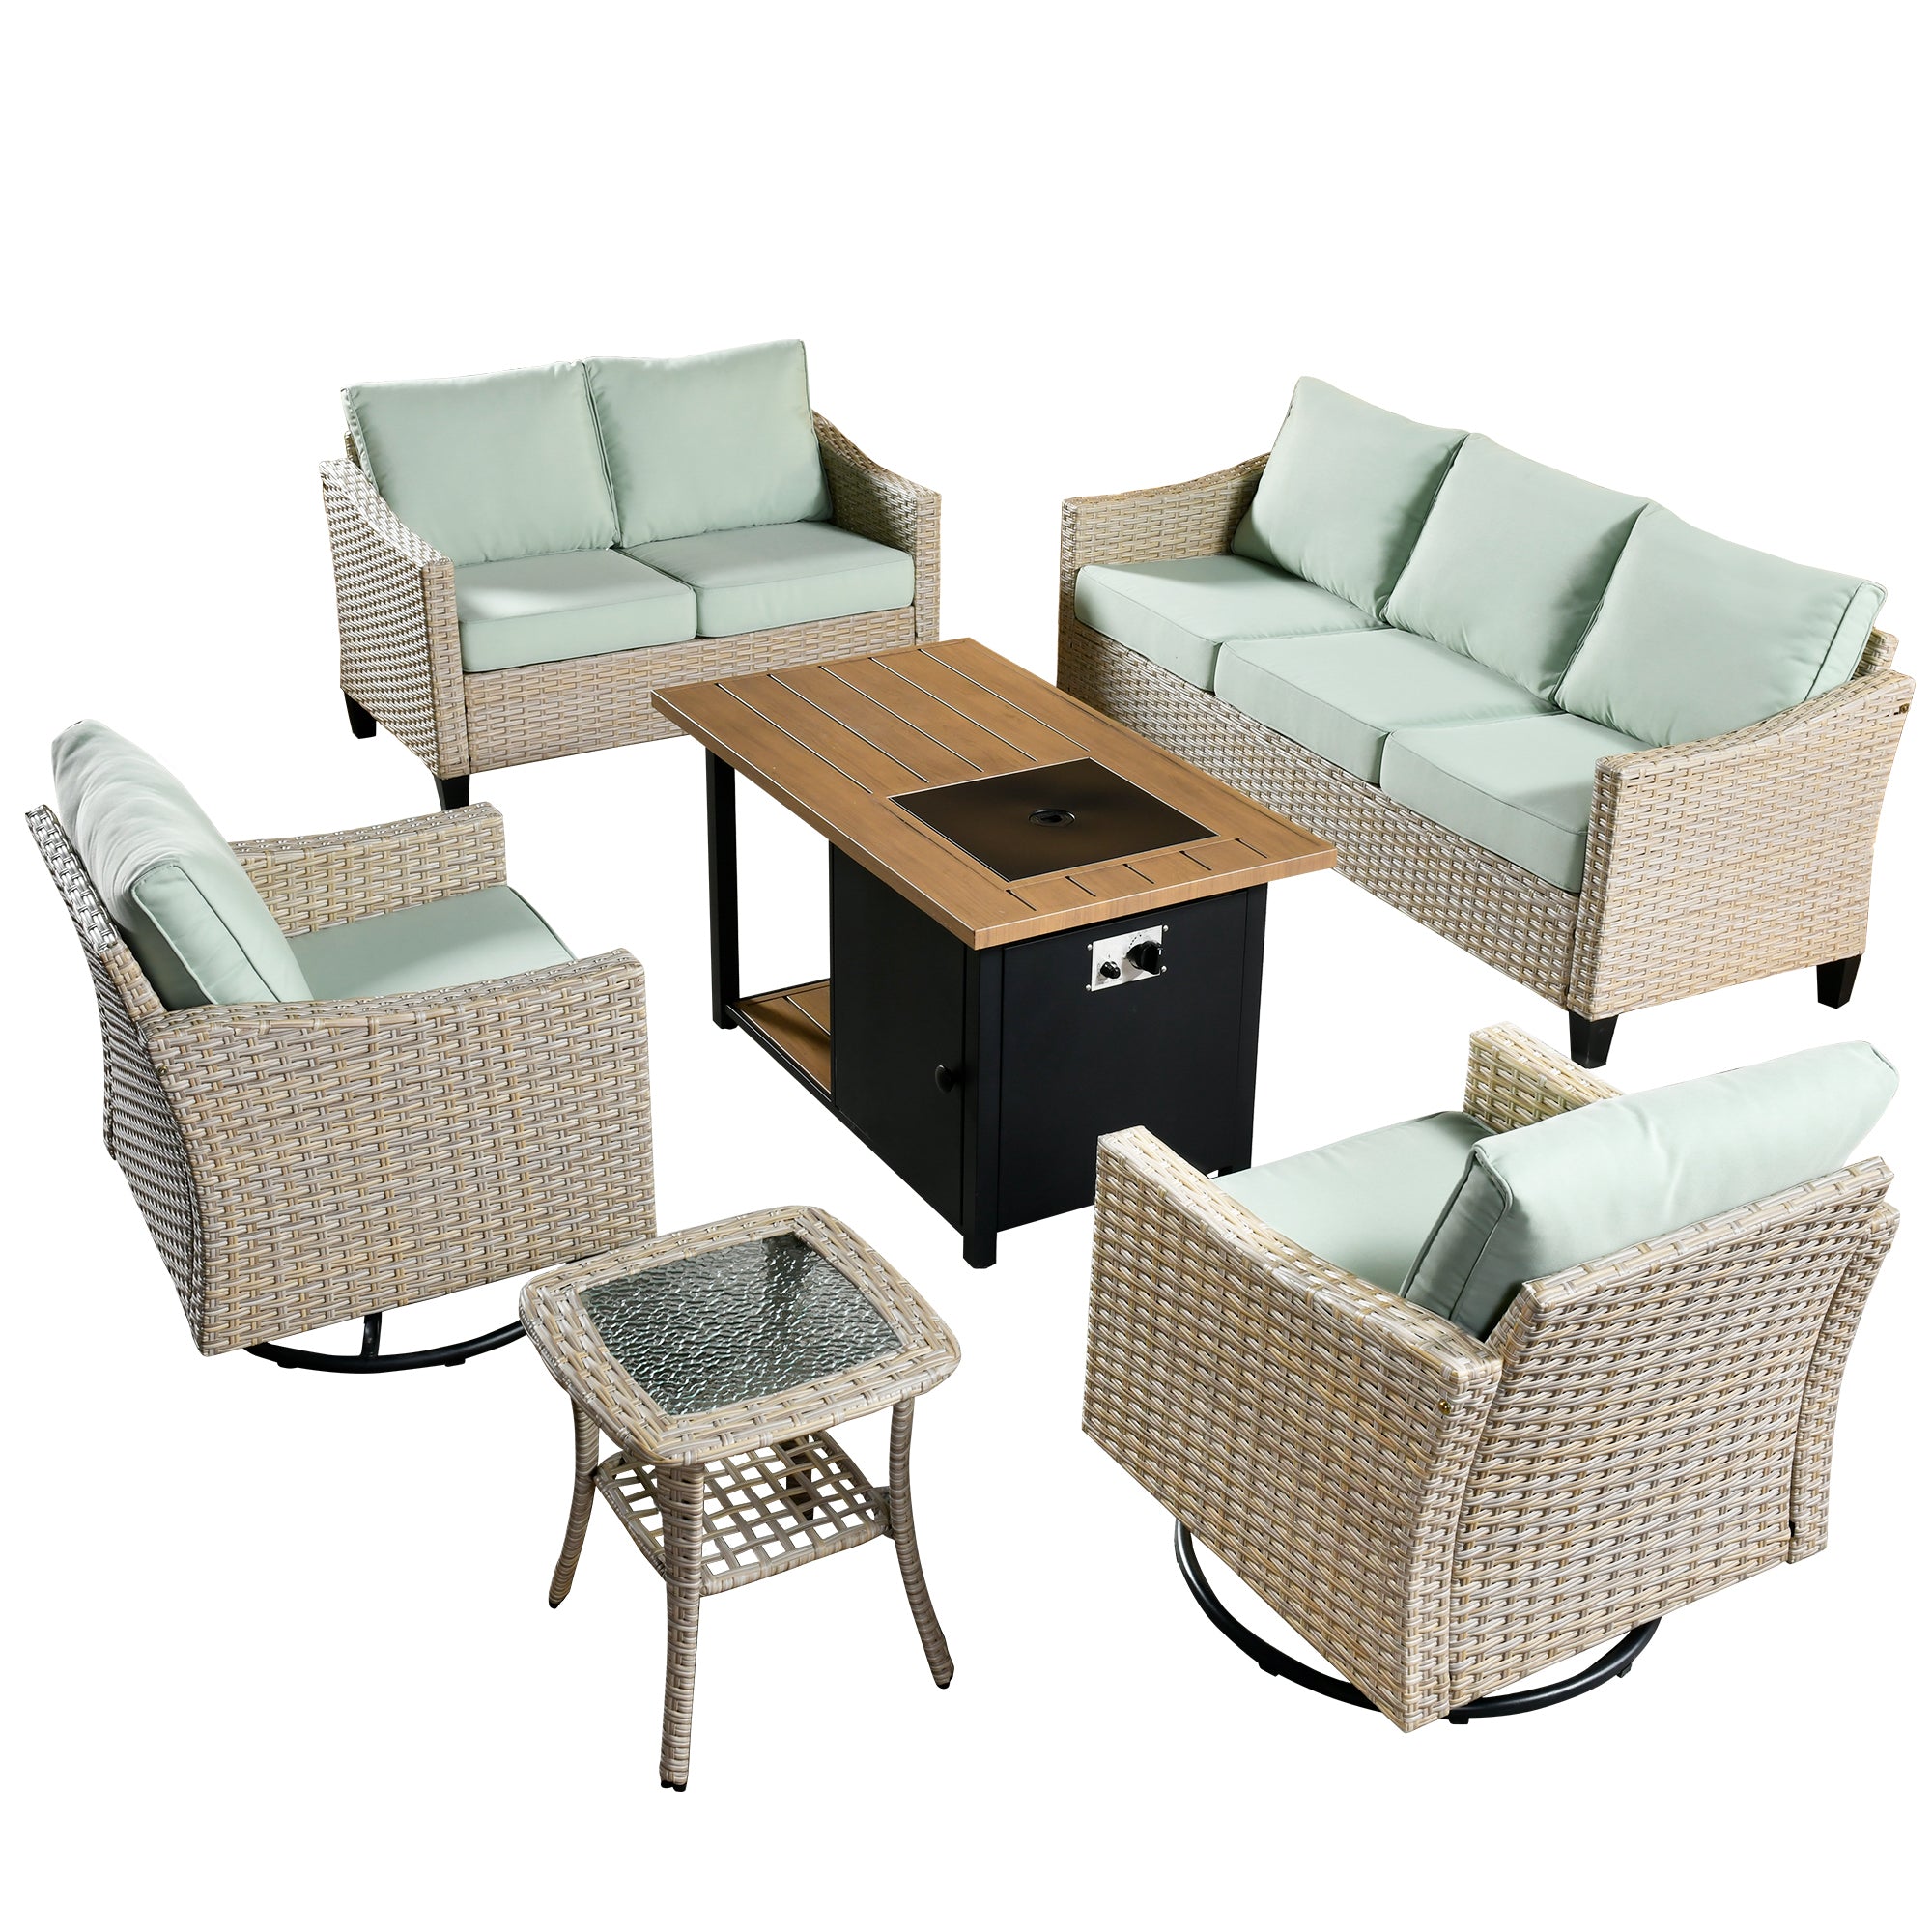 Ovios Athena Series Outdoor Furniture Sets 6-Piece include Swivel Chair & 46'' Fire Pit Table